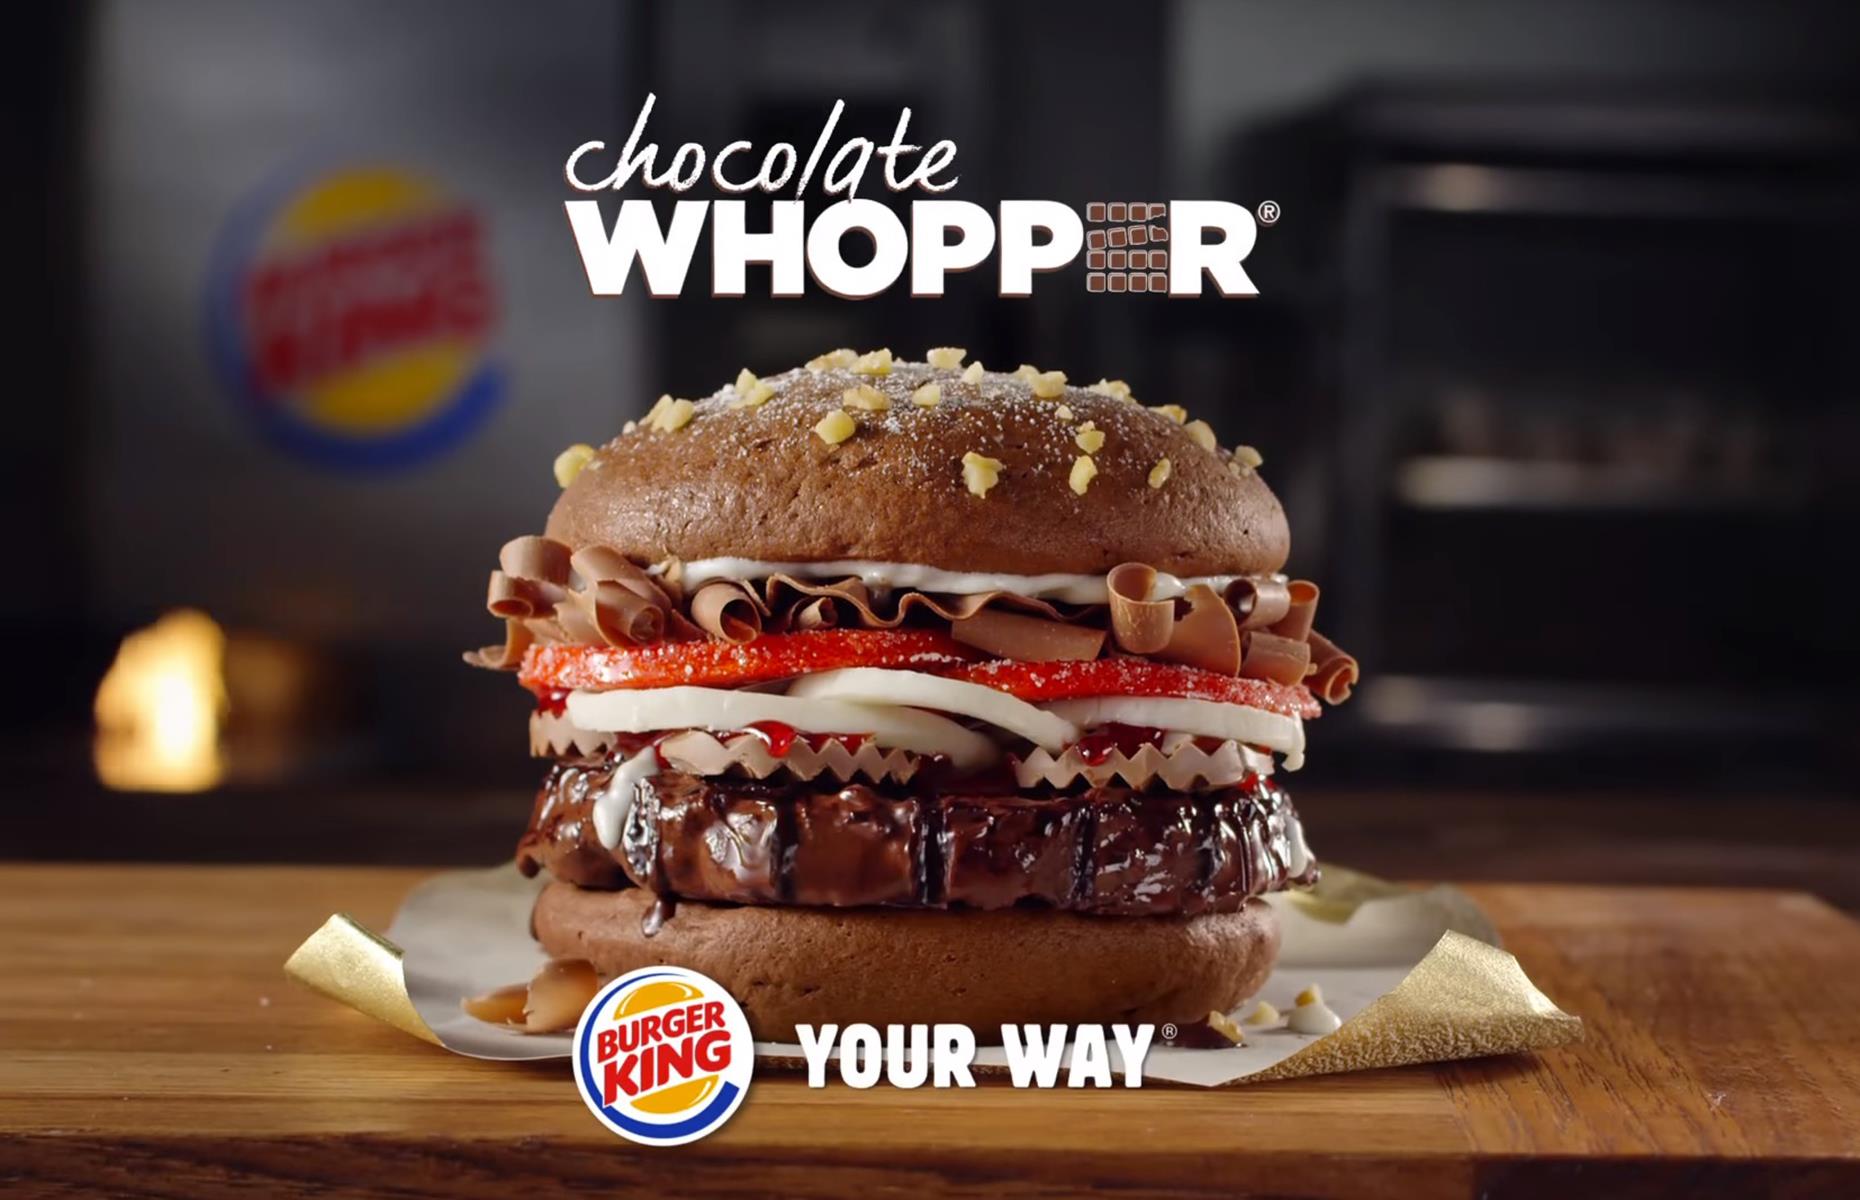 Burger King unveils the Chocolate Whopper